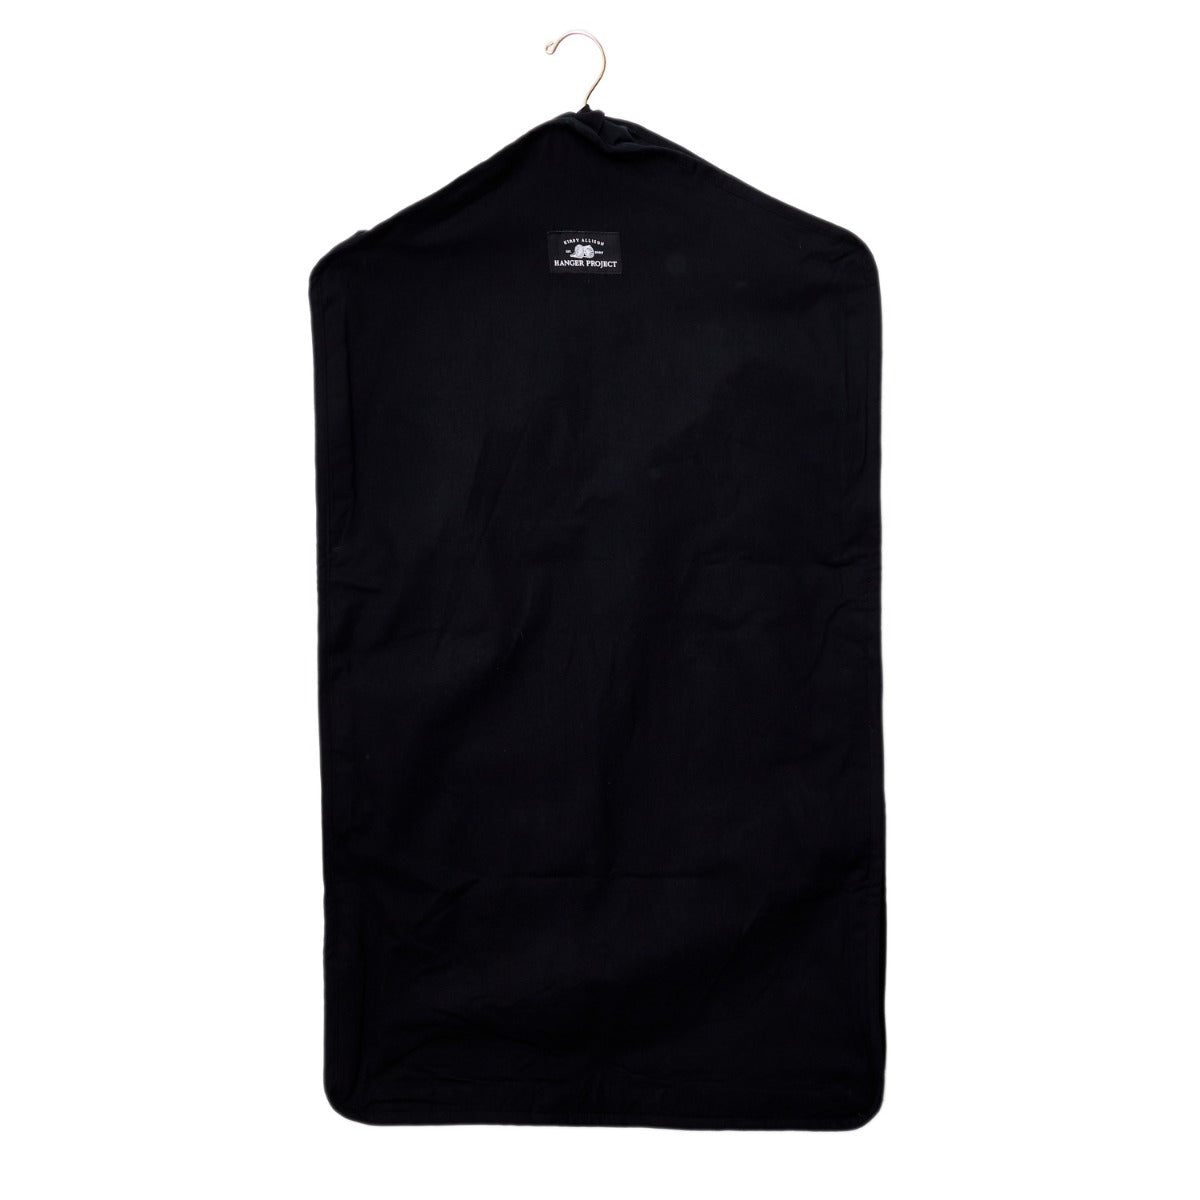 A Luxury Garment Storage Bag from KirbyAllison.com hanging on a white background.